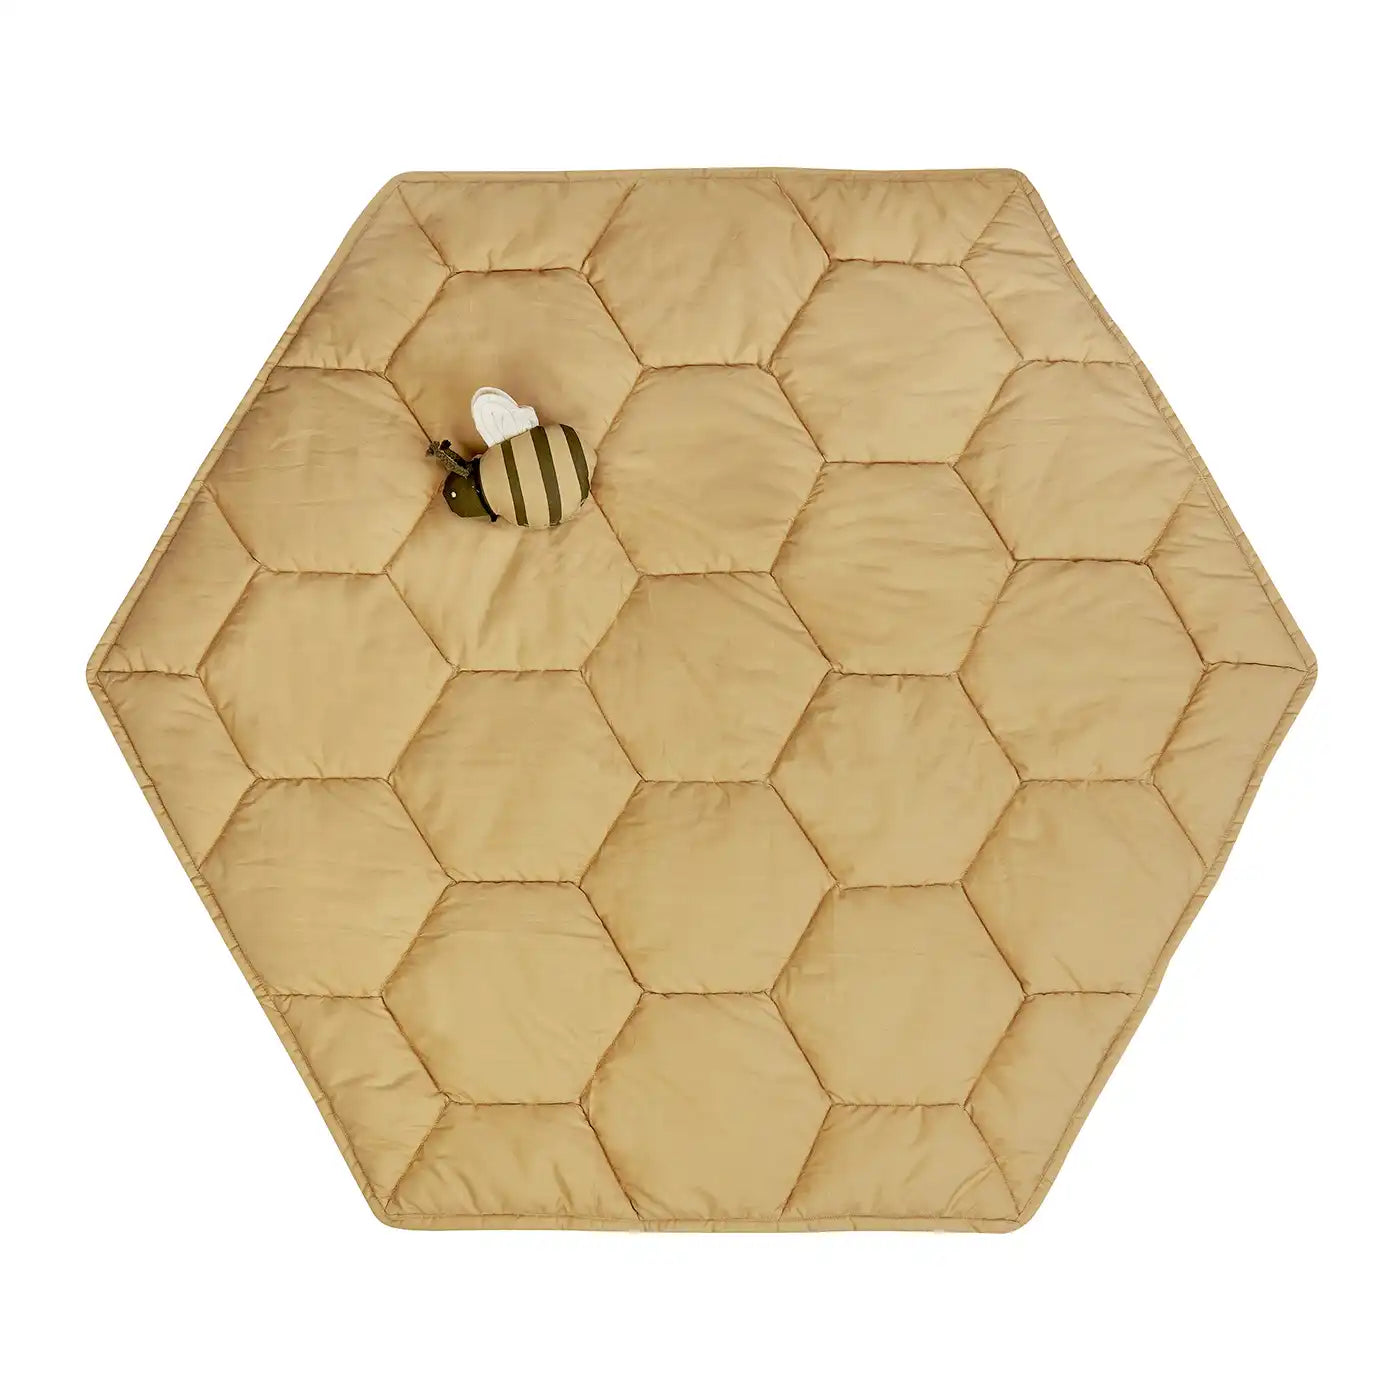 Lorena Canals Honeycomb Playmat (Planet Bee Collection)